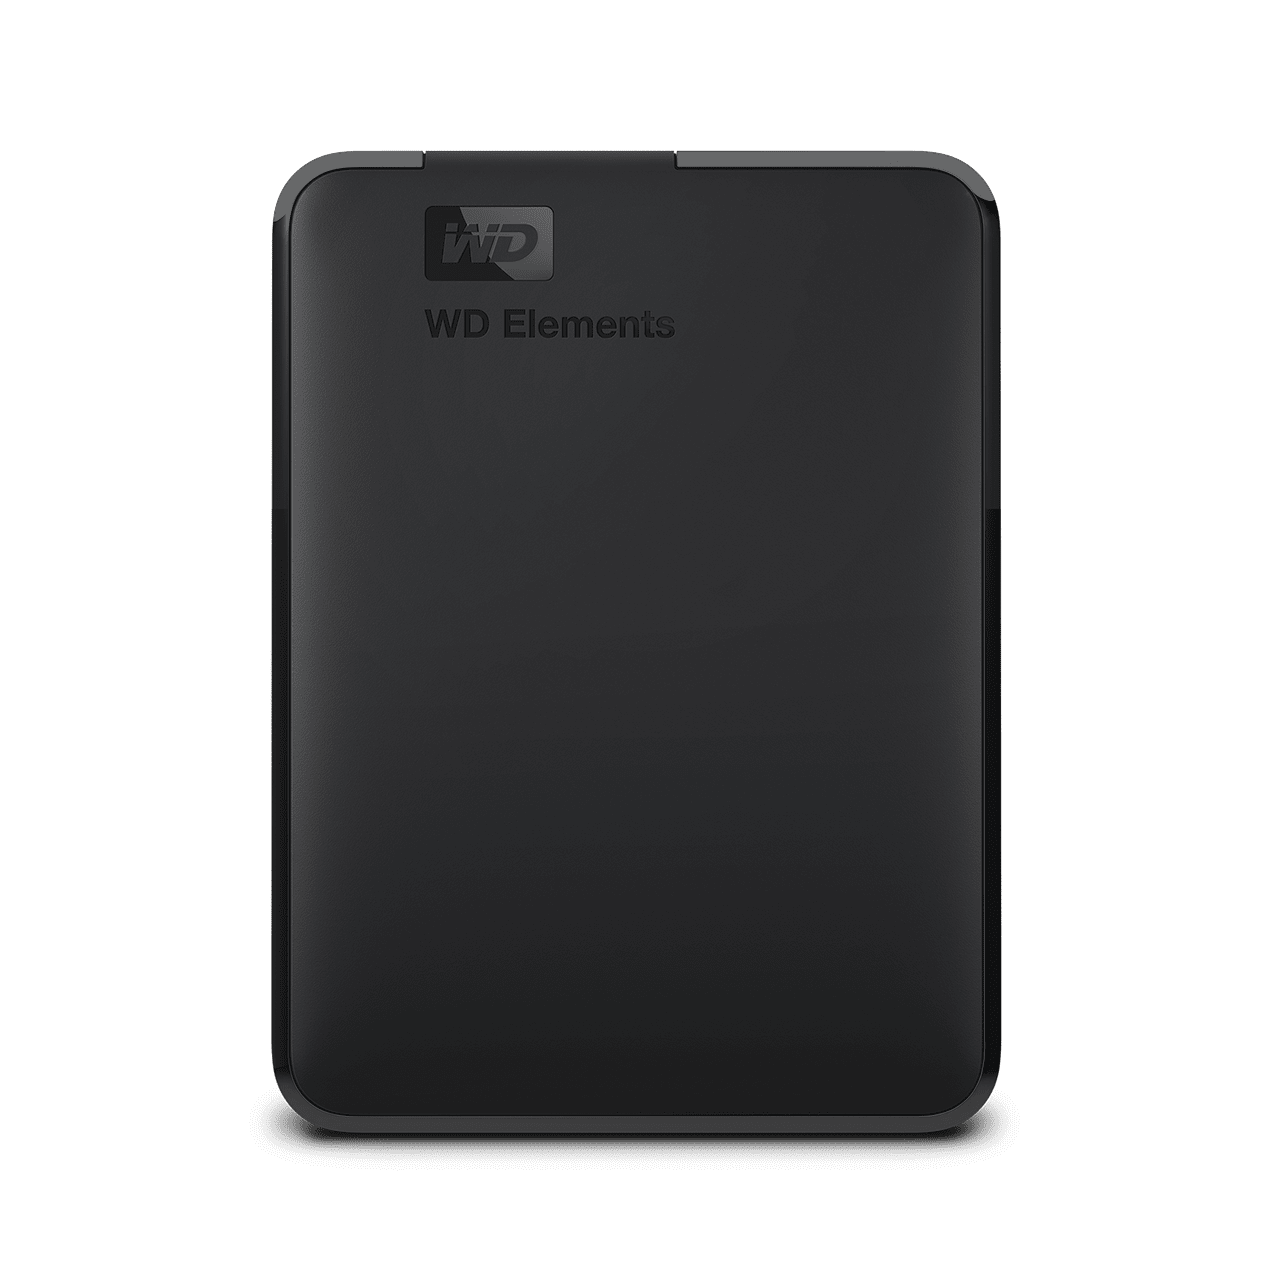 1TB WD easystore Portable Drive (Certified Refurbished) $24.99